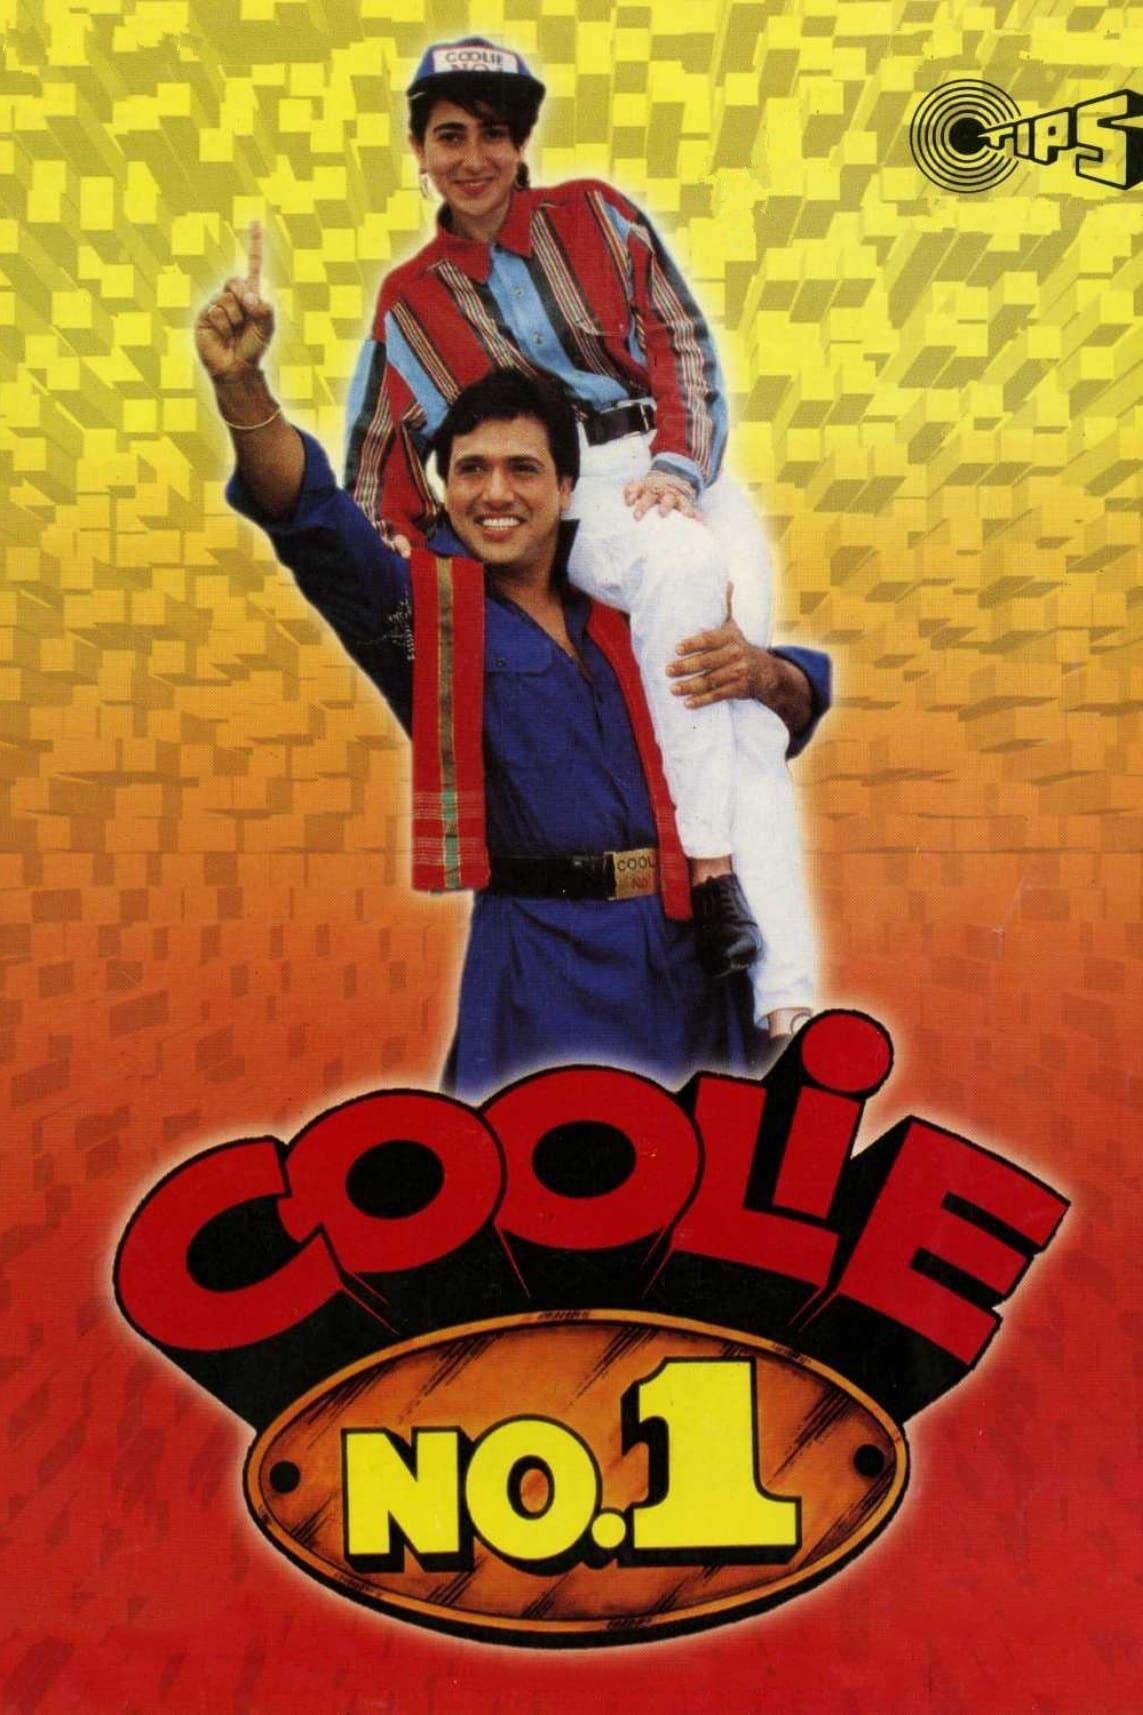 Coolie No. 1 poster